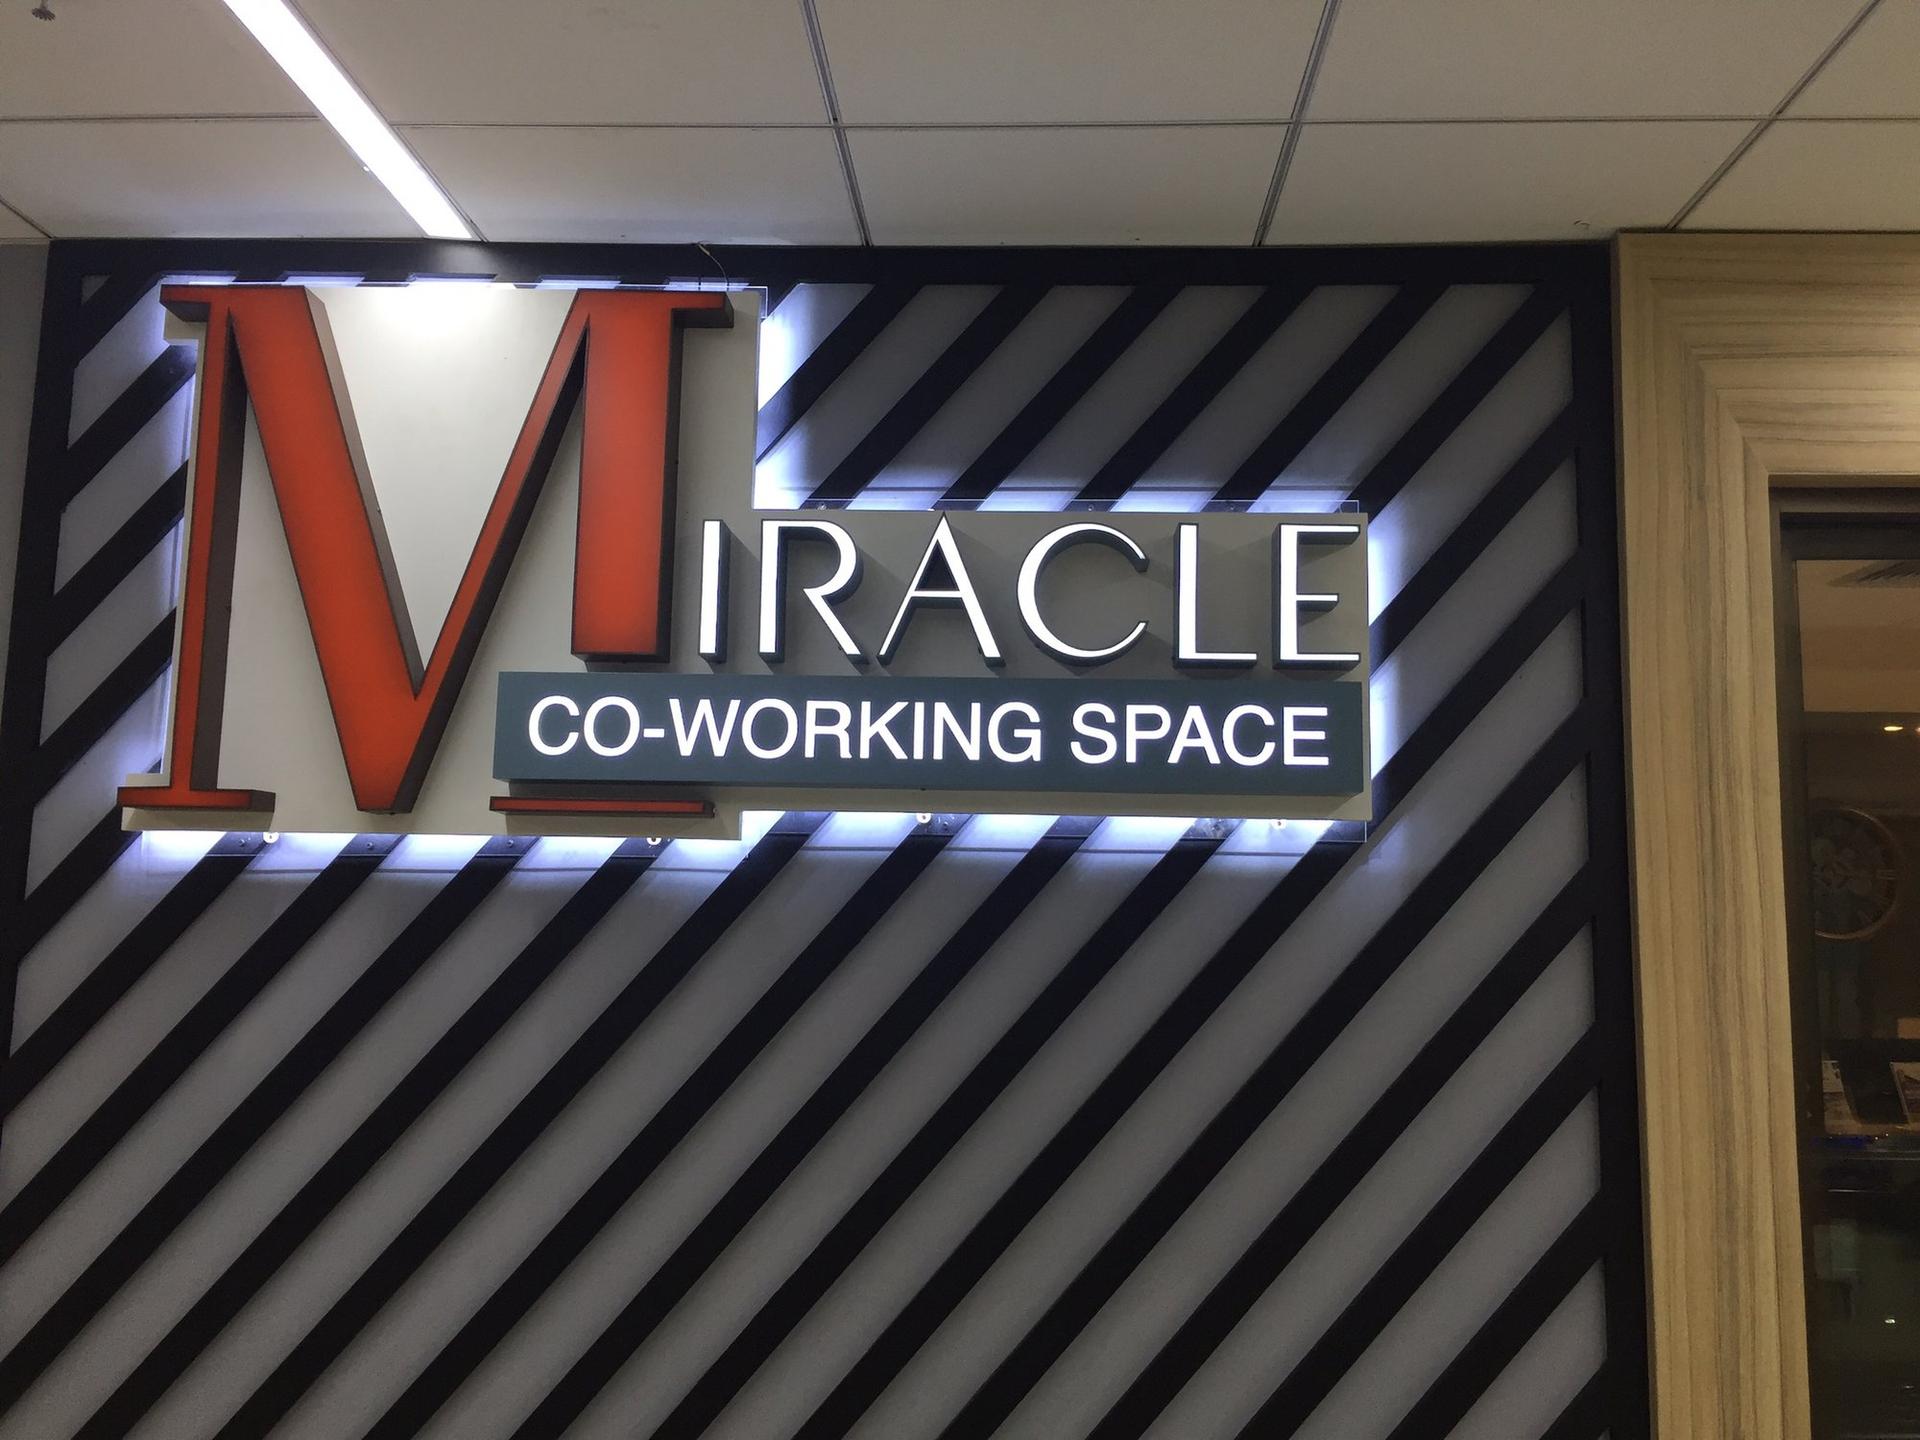 Miracle Co-Working Space image 8 of 44